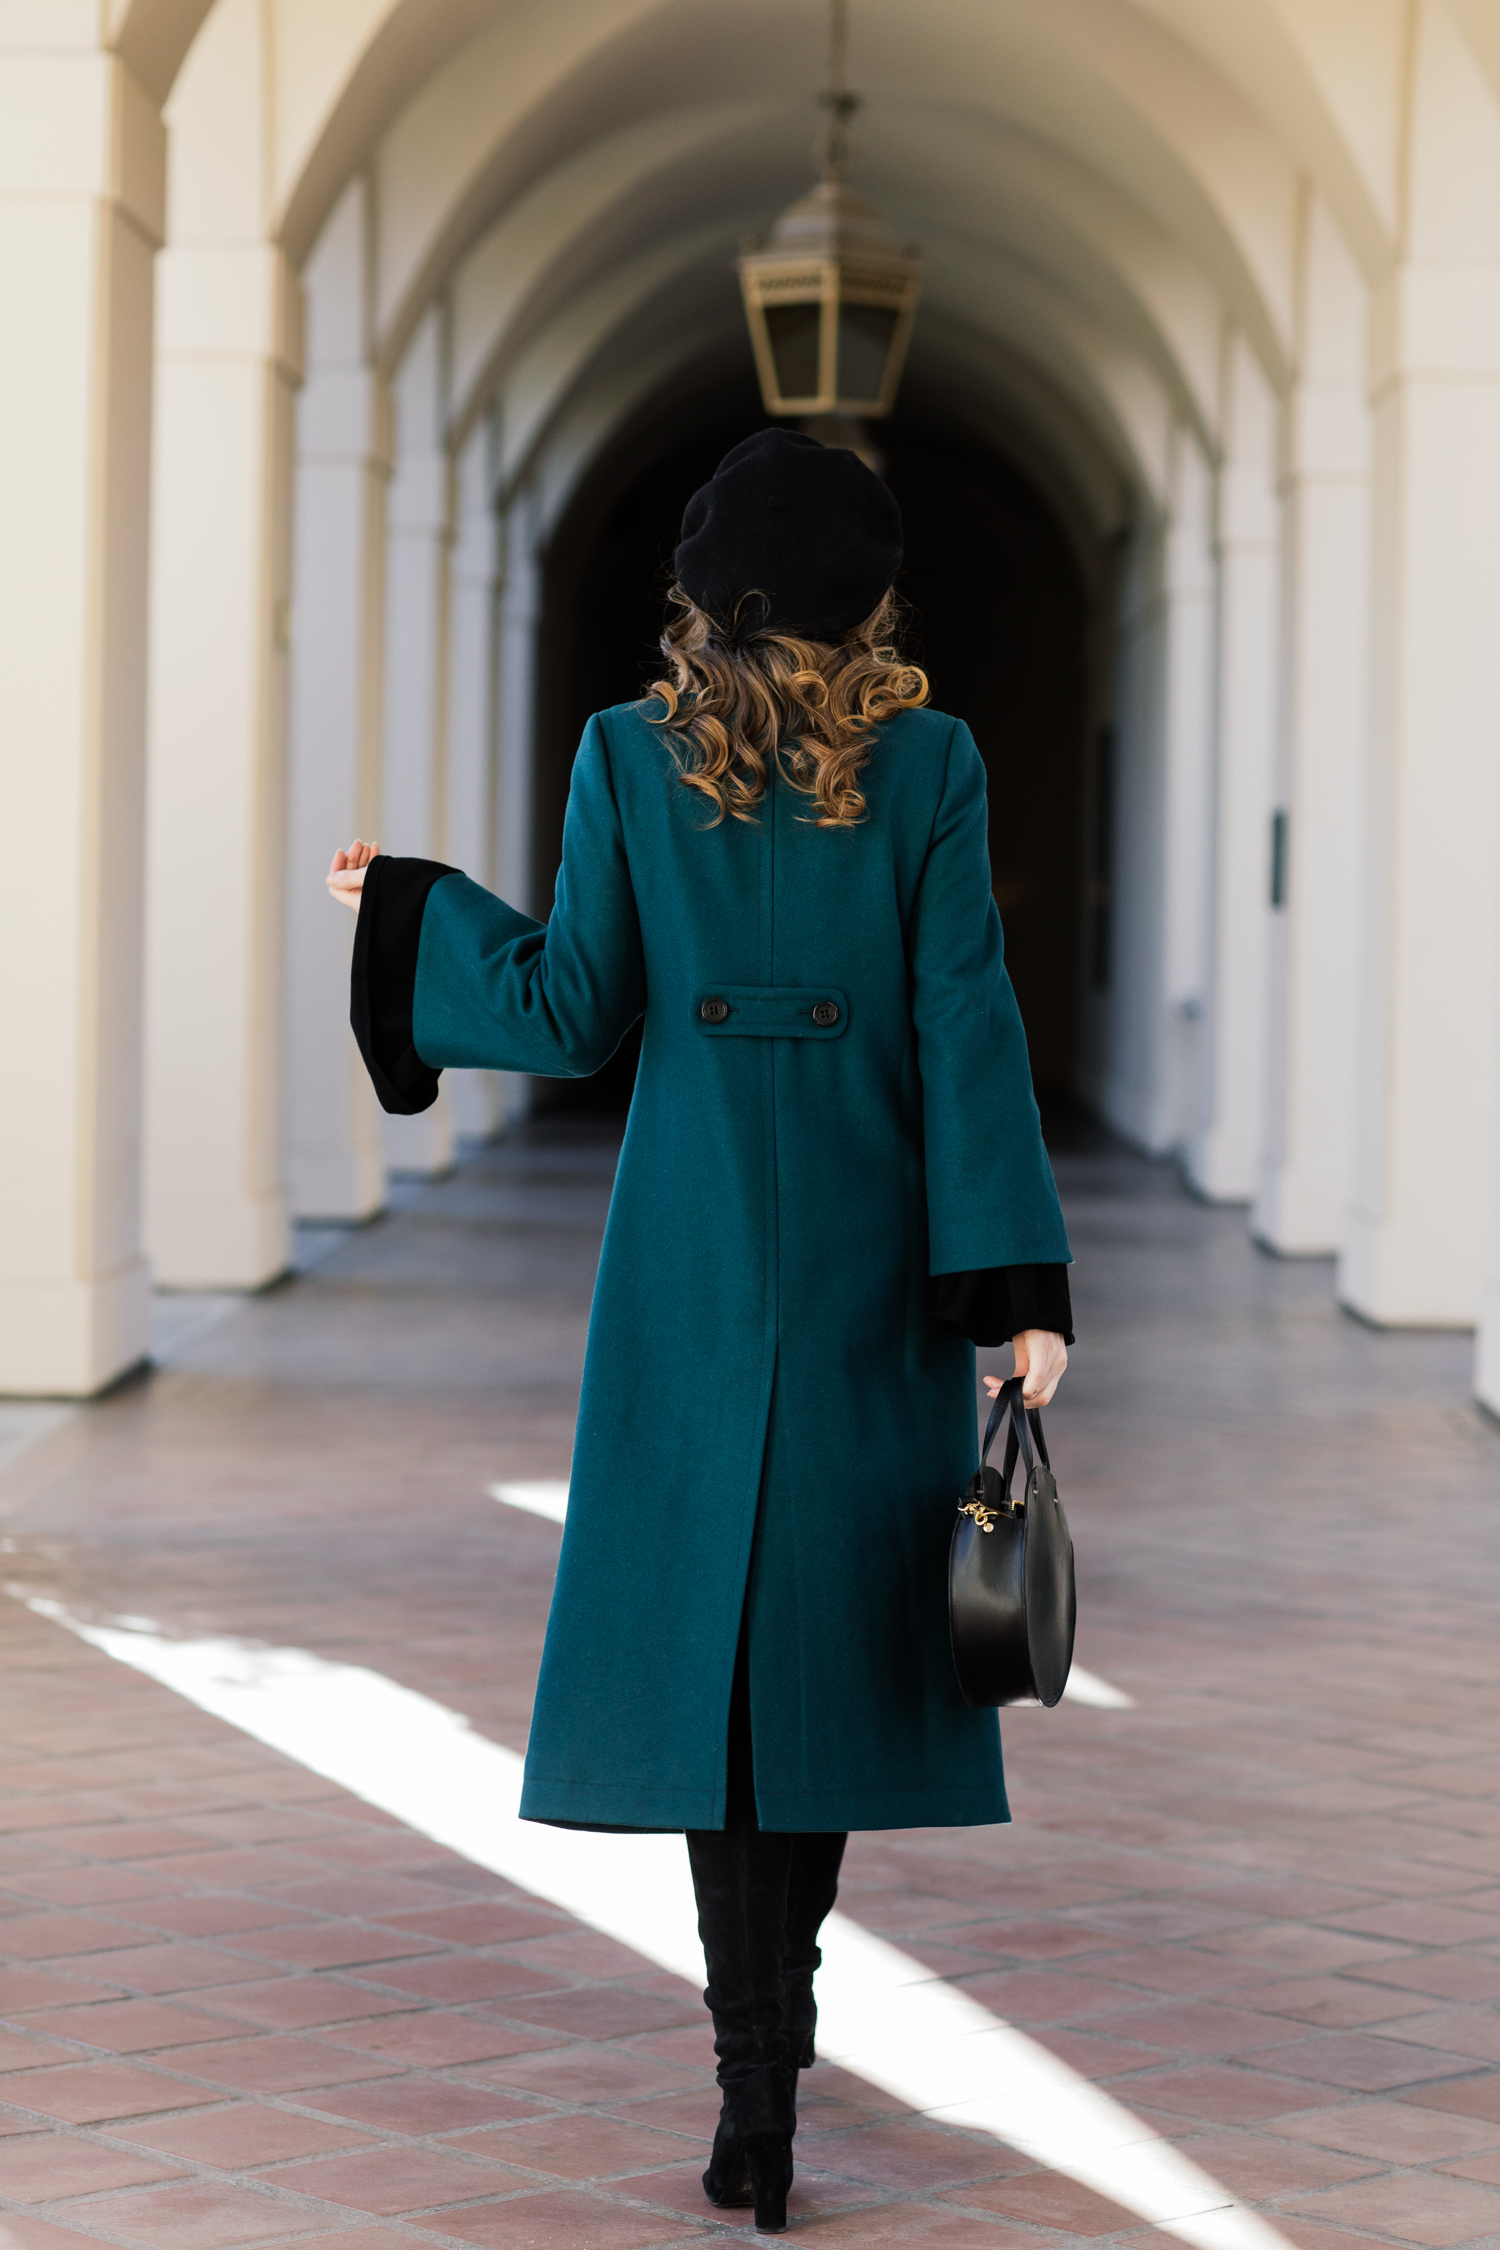 Alyssa Campanella of The A List blog channels her inner duchess wearing Frilly Audrey Coat and Clare V Alistair bag